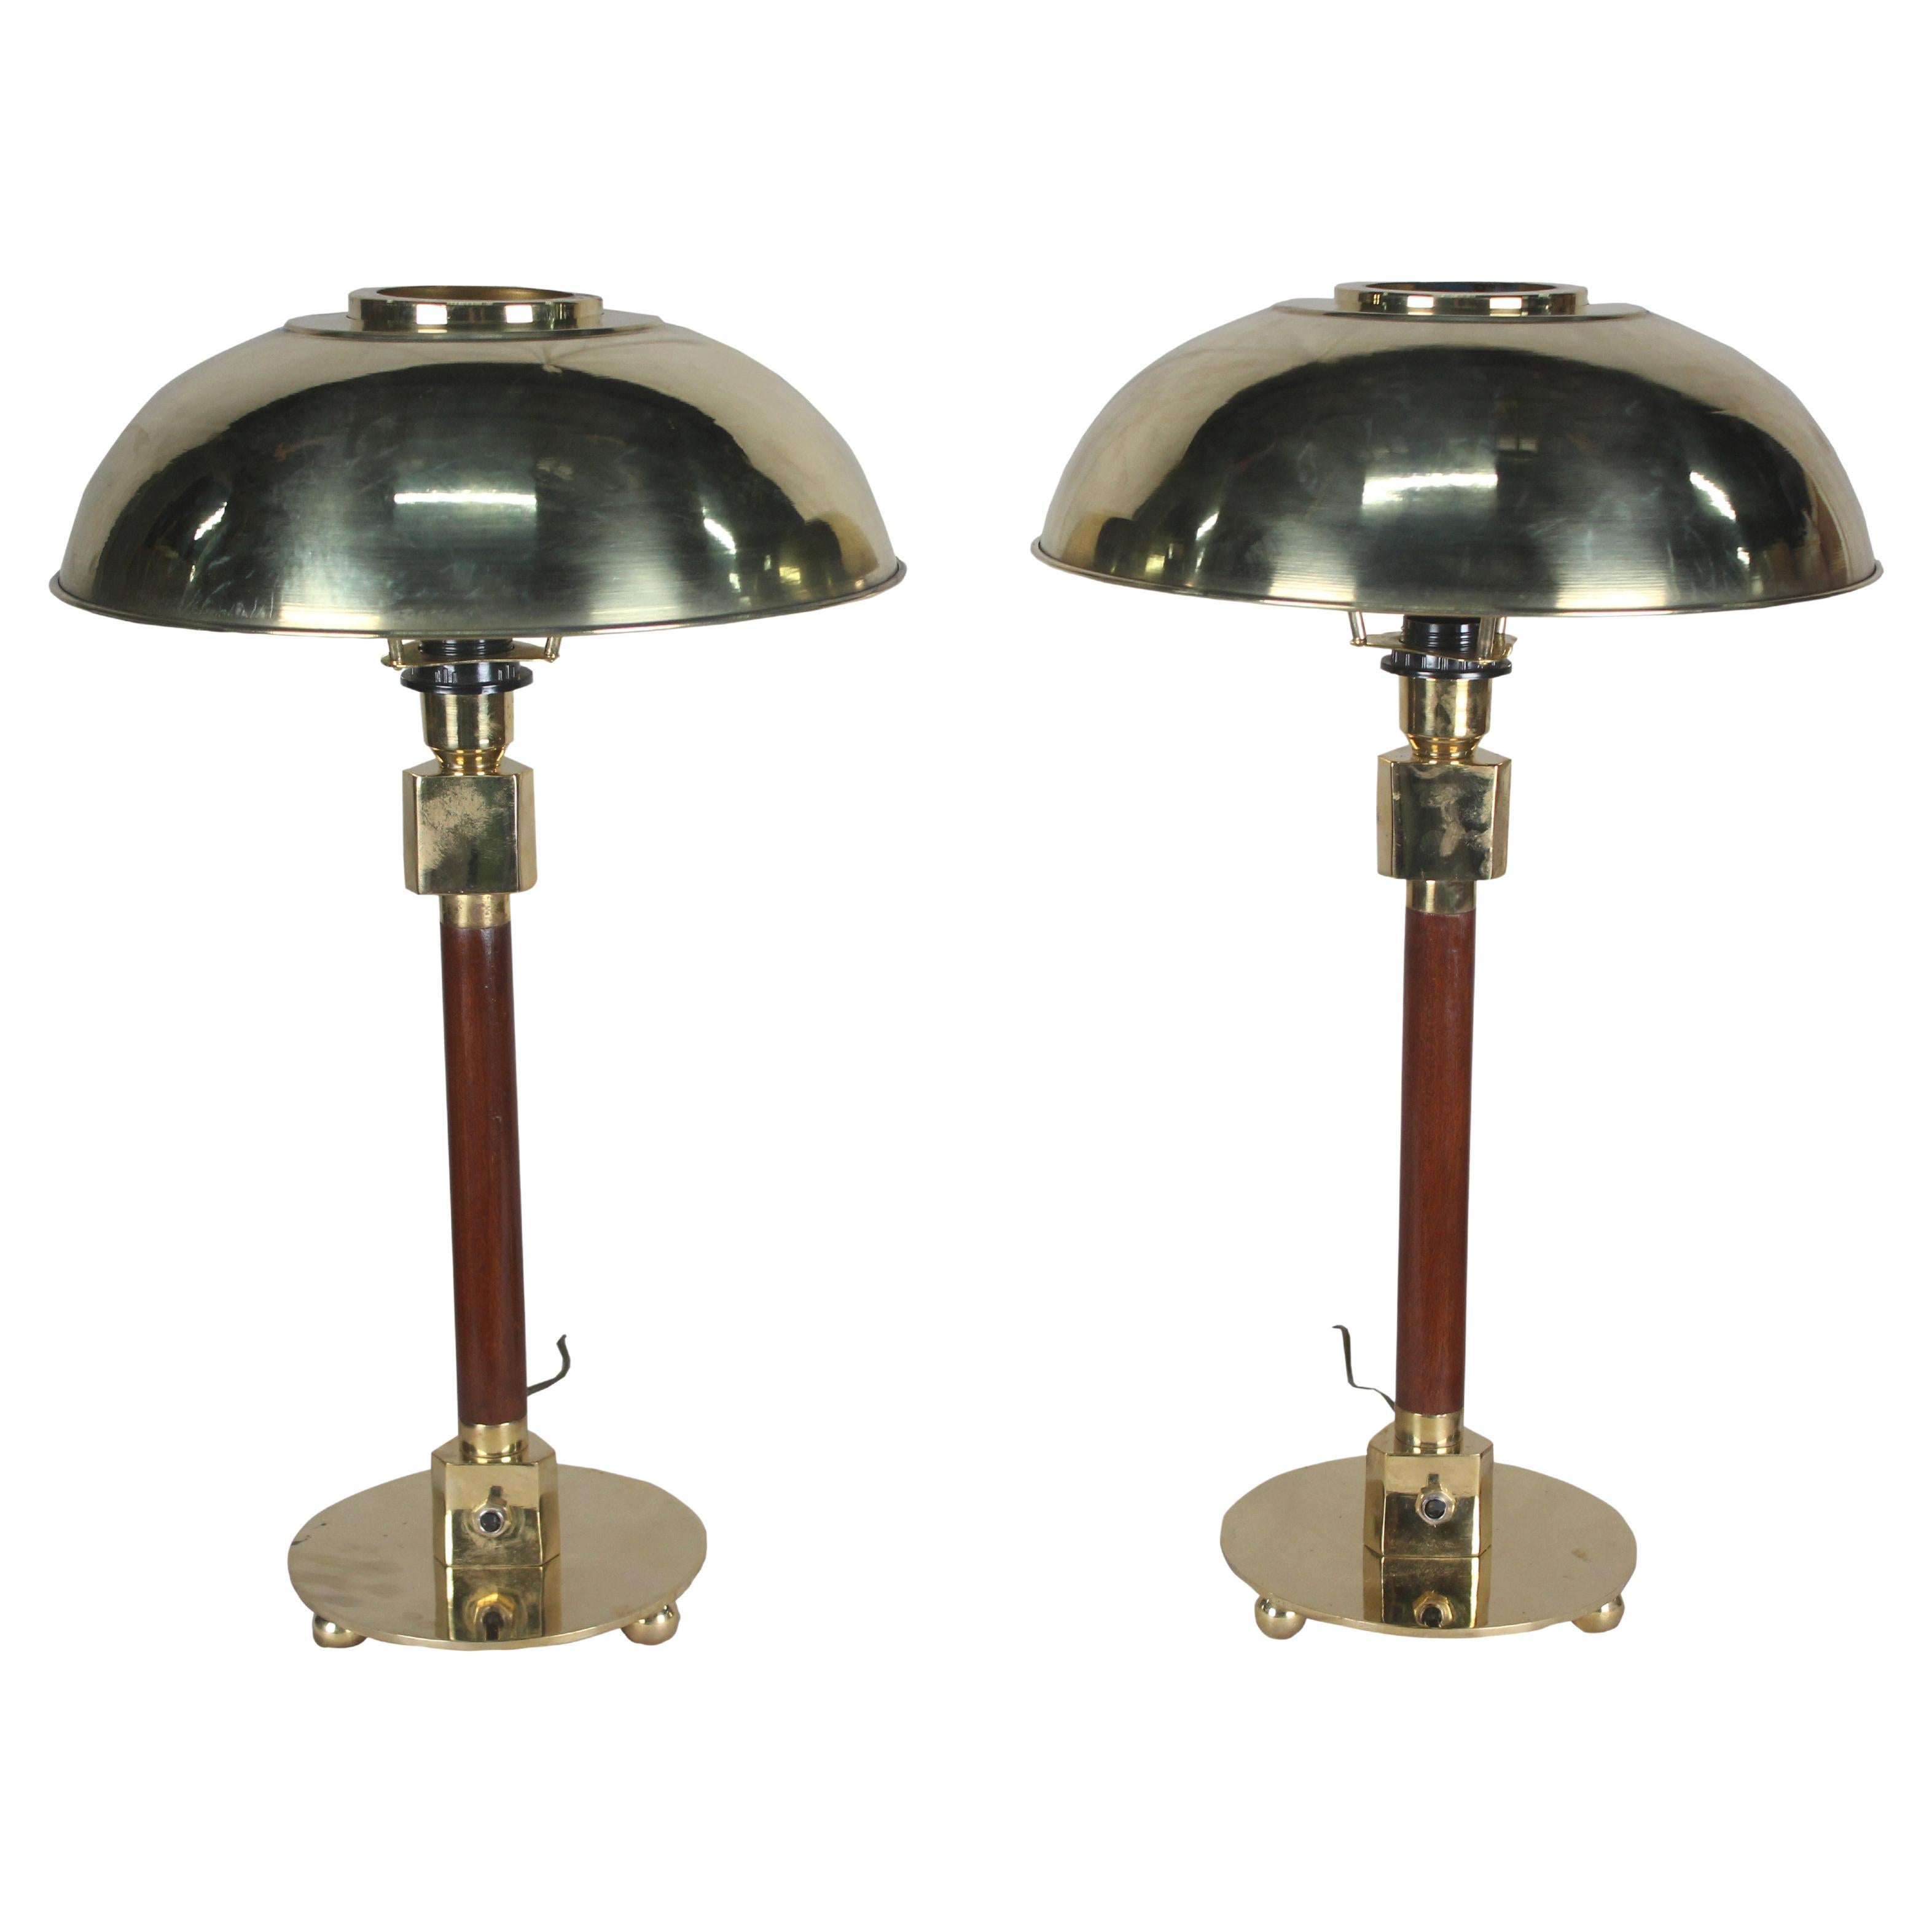 Pair of Nautical Teak and Brass Nautical Ship's Stateroom Table Lamps